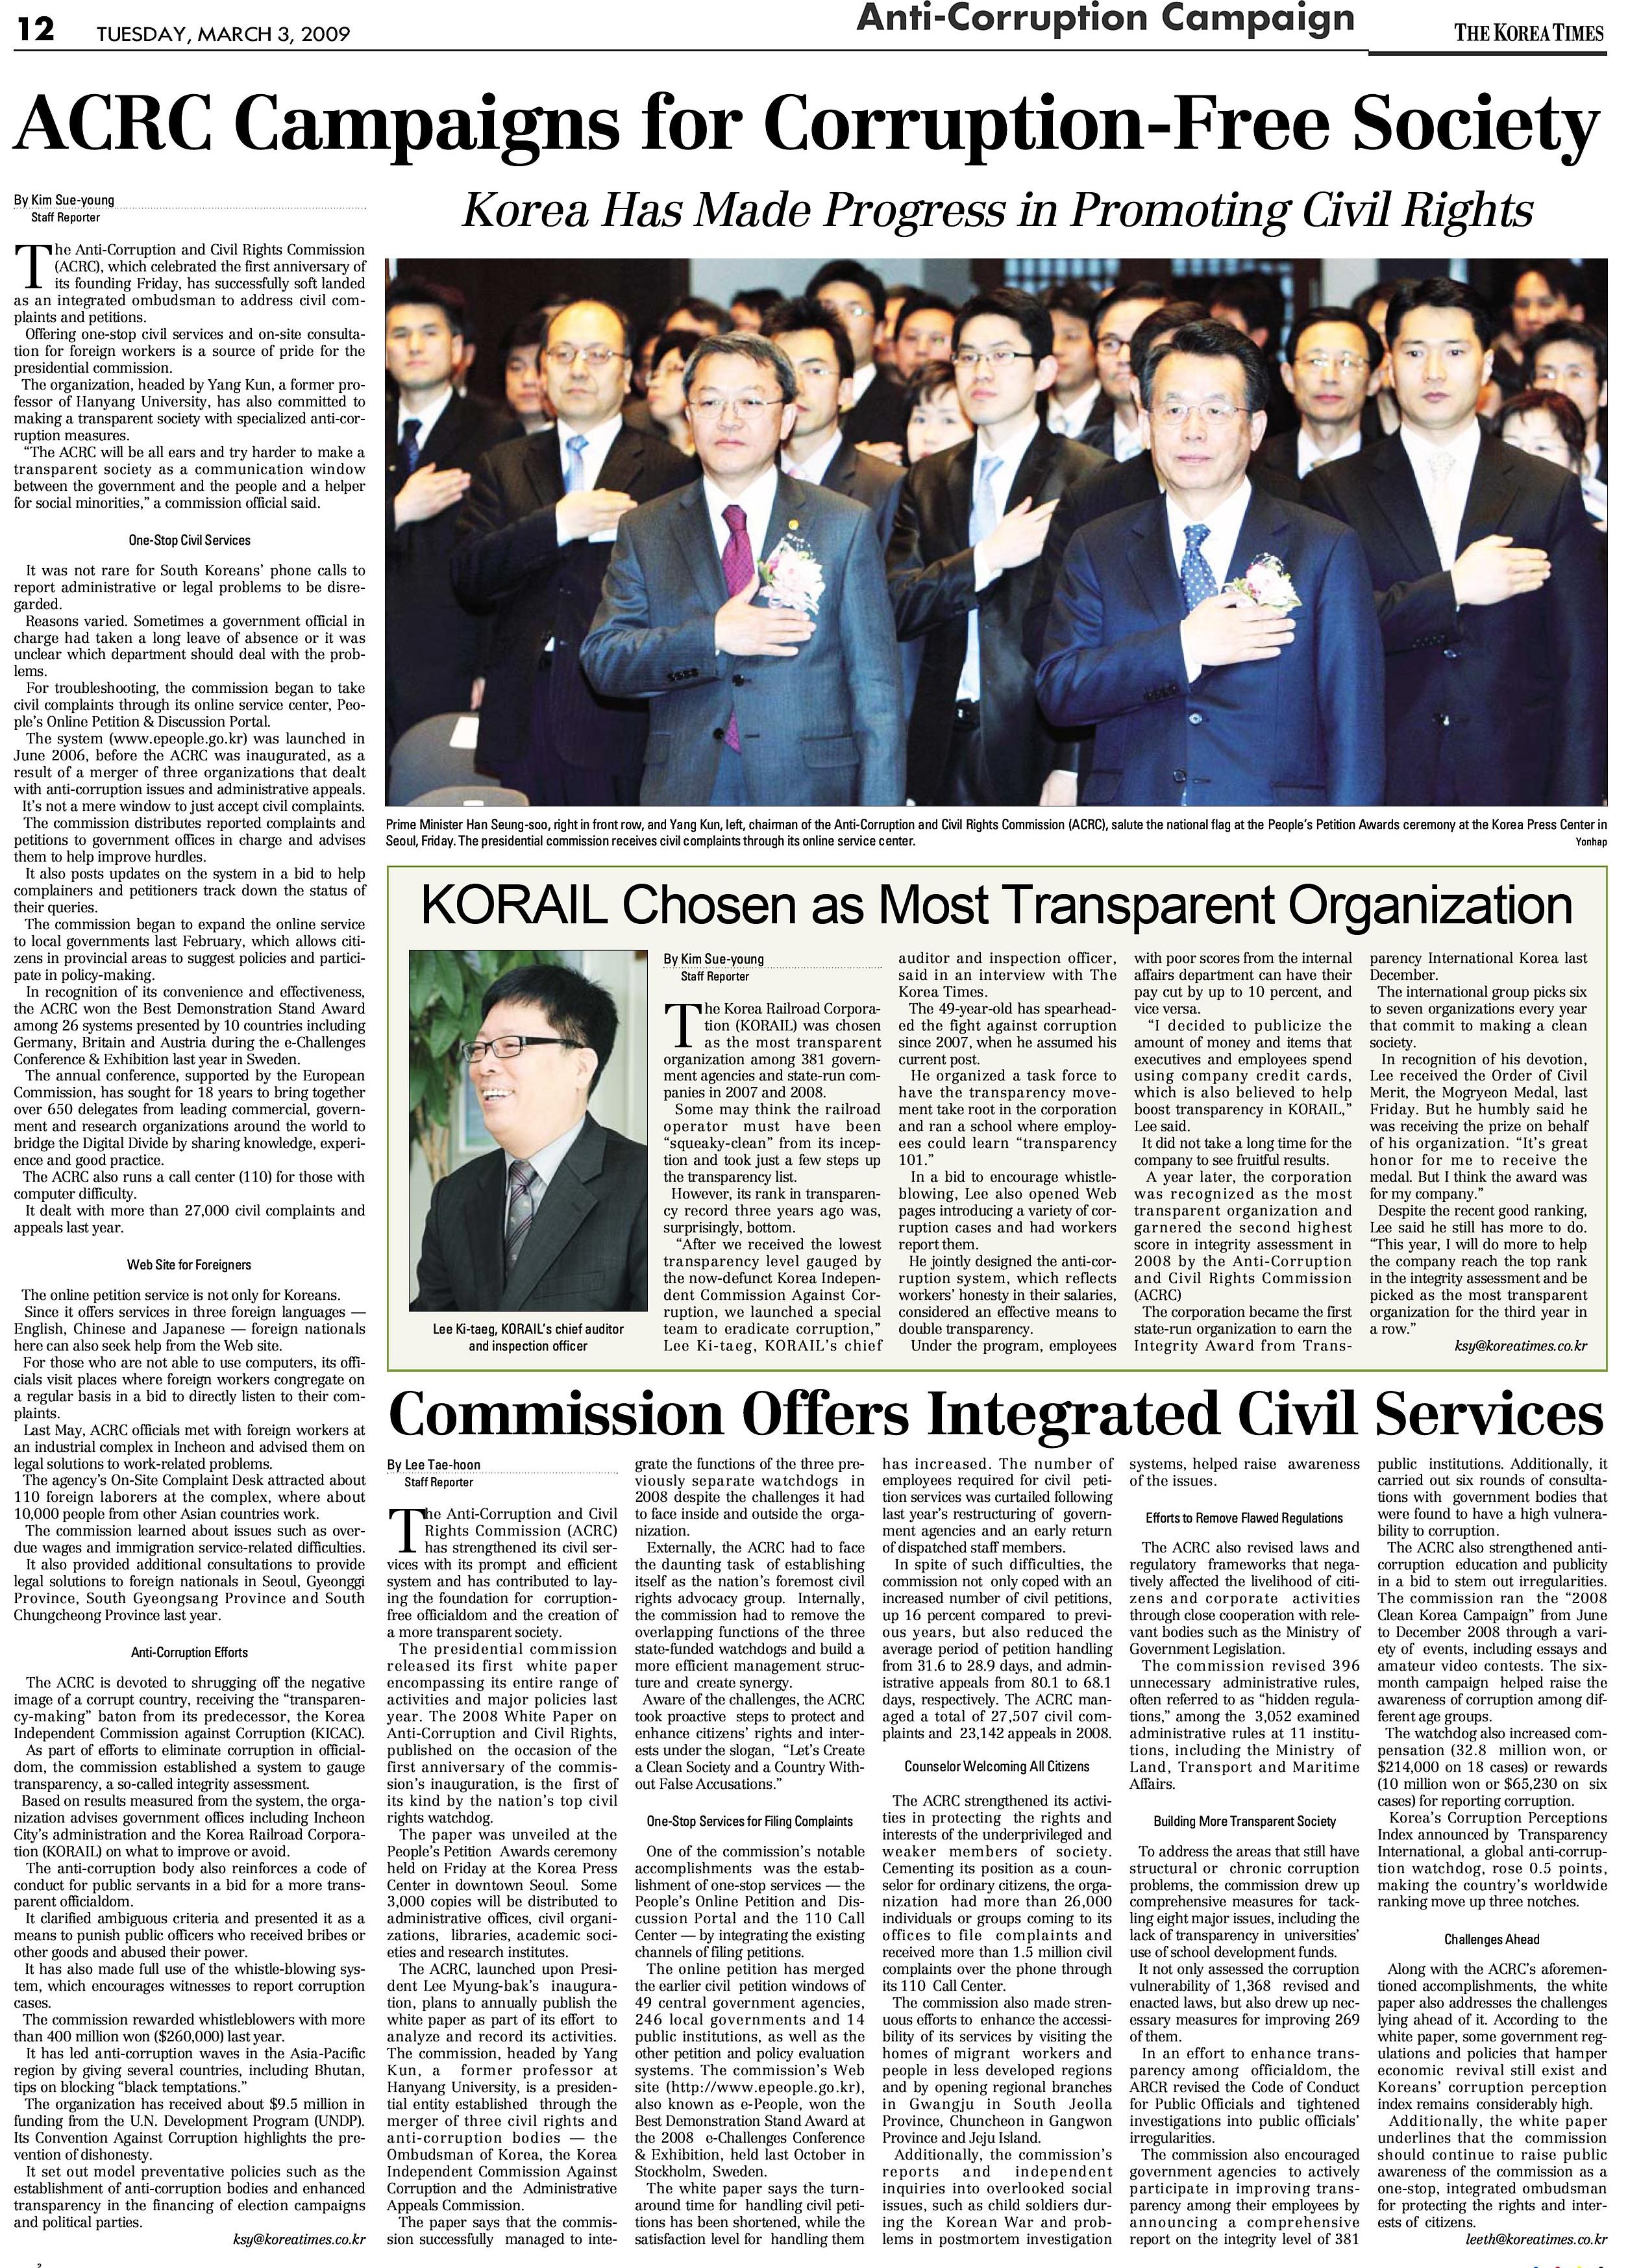 ACRC Campaigns for Corruption-Free Society. (Mar. 3, 2009, The Korea Times) list image